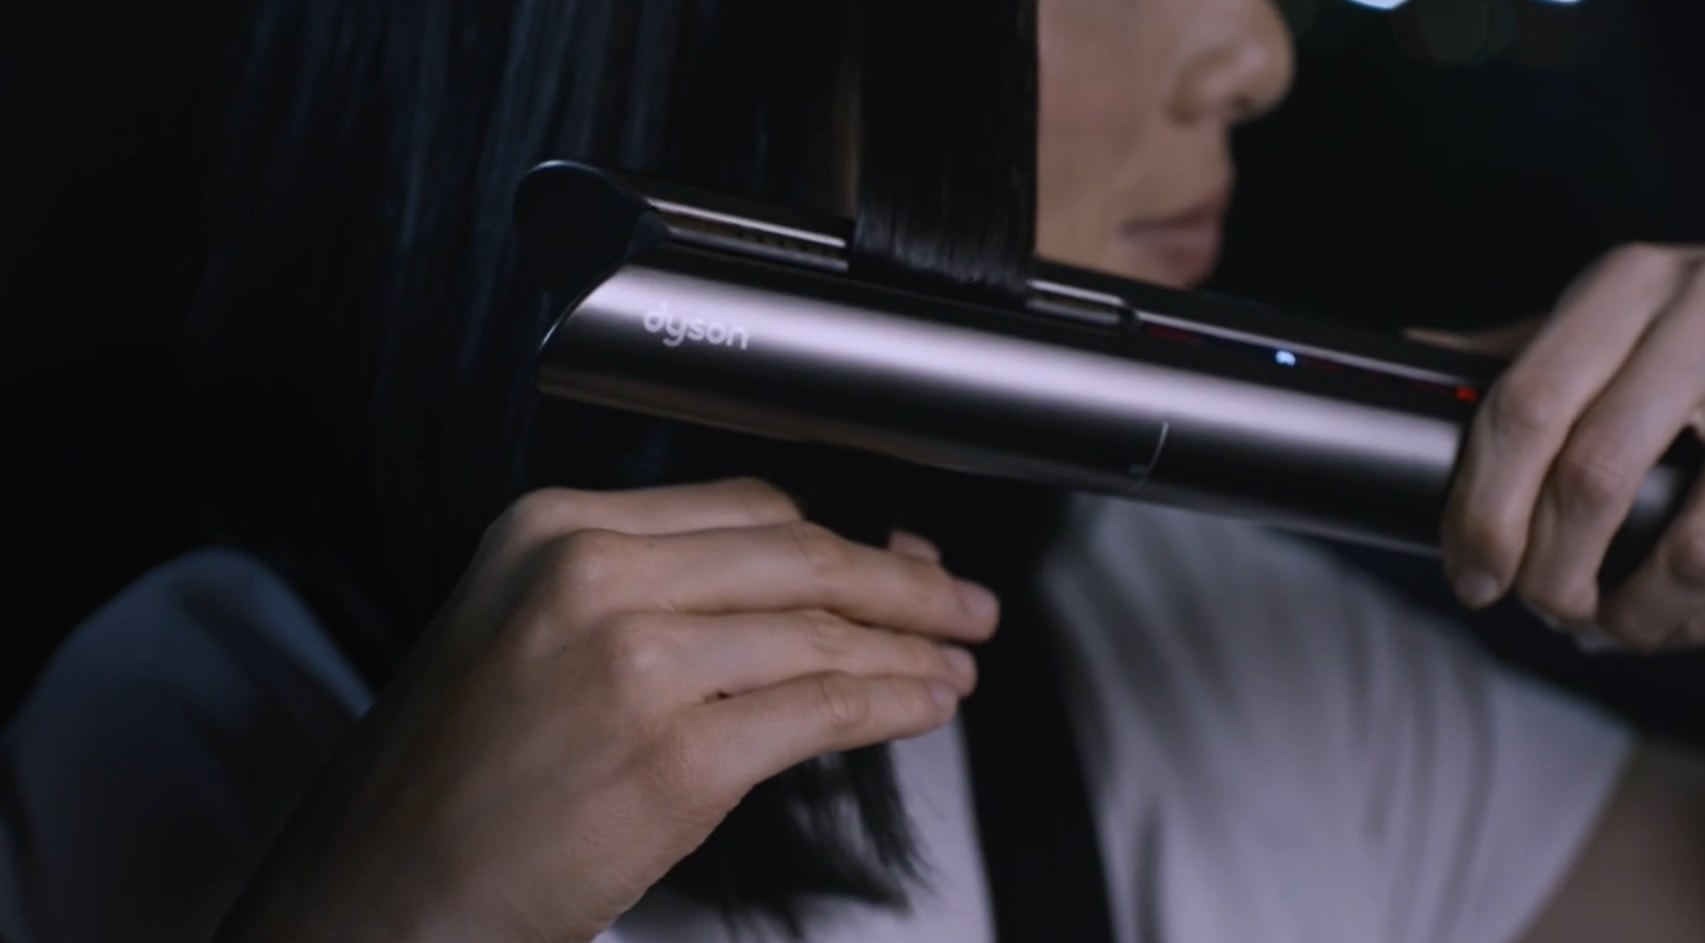 Dyson's new product offers another treat for the hair